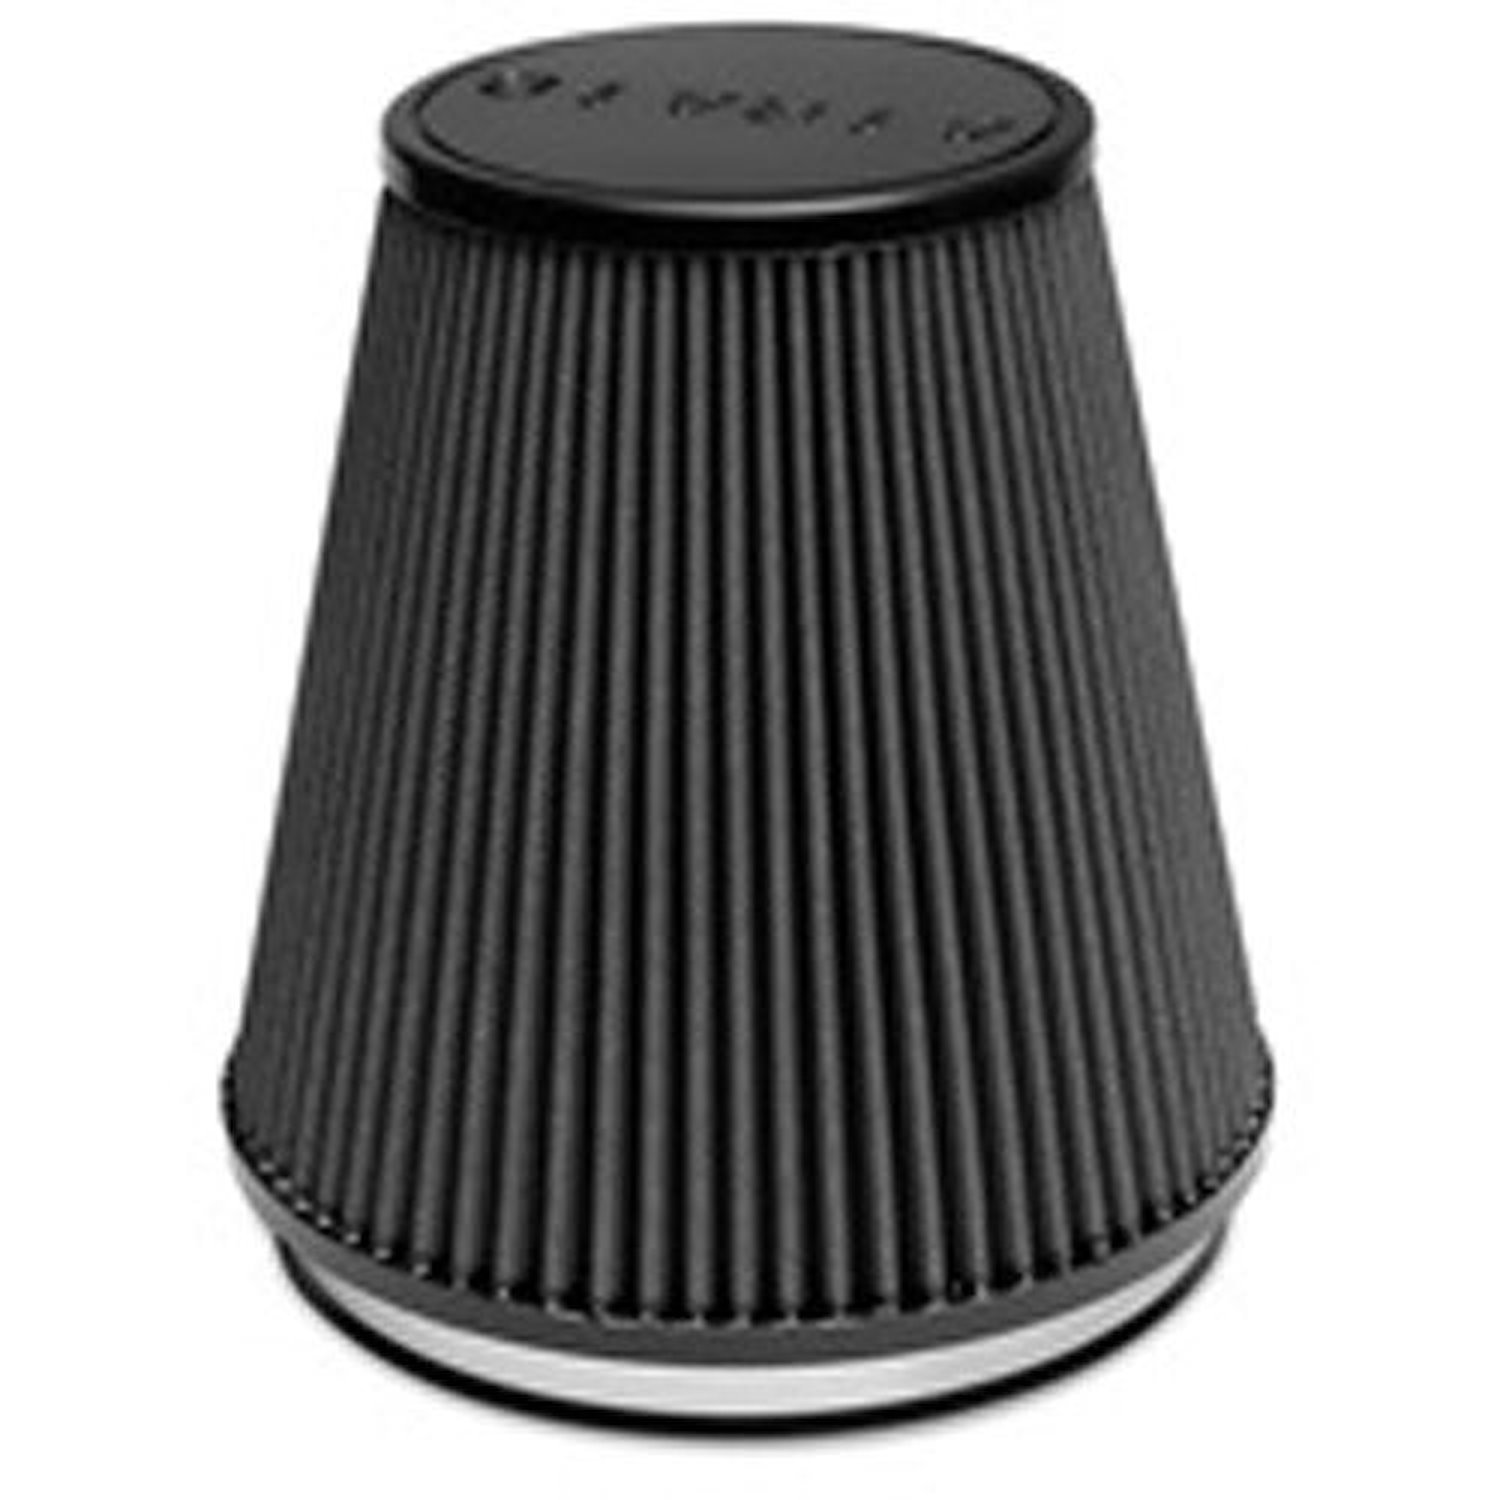 Replacement filter - dry black media